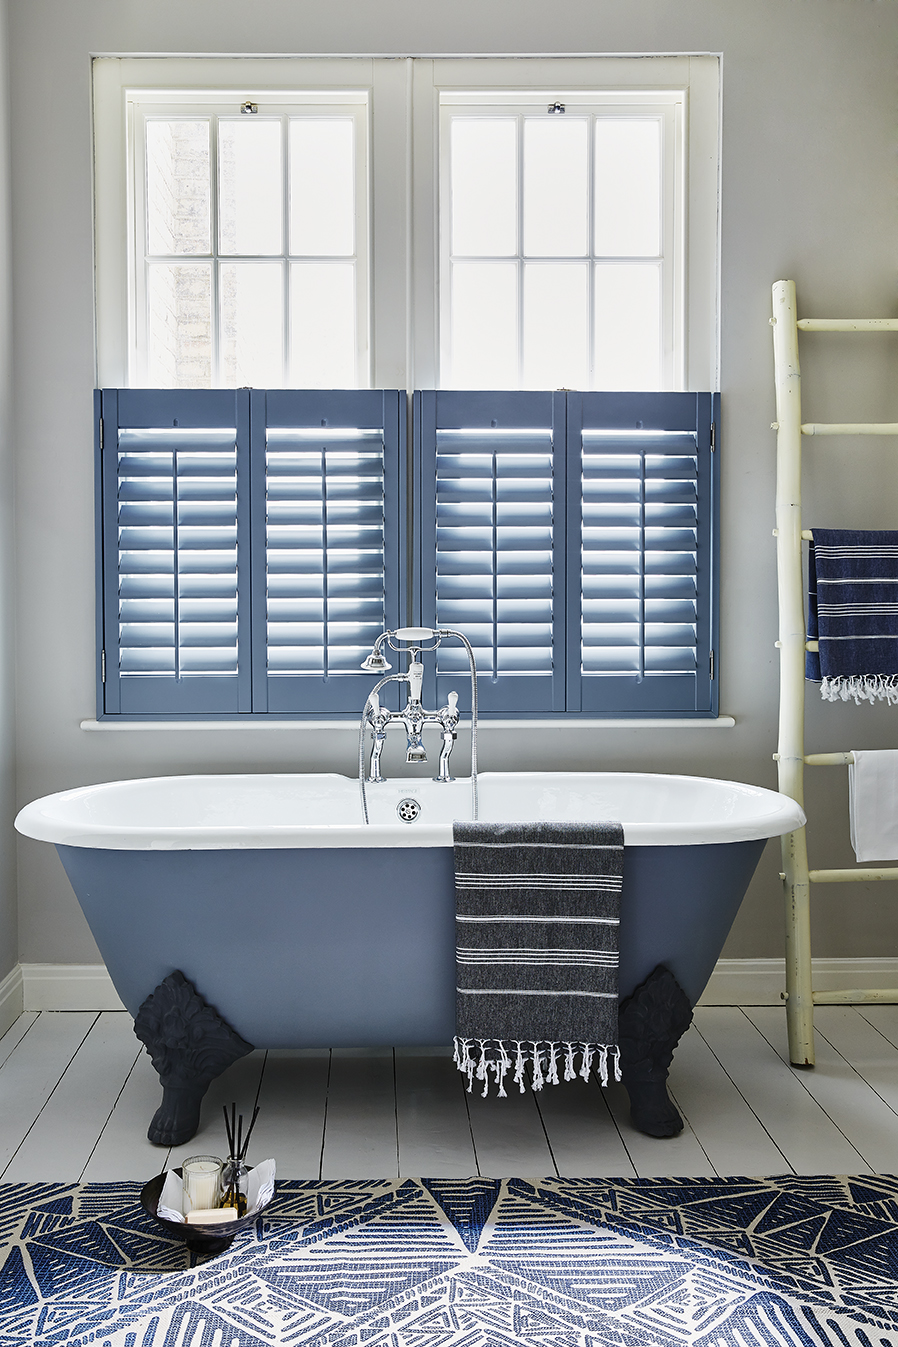 cafe style shutters in a bathroom